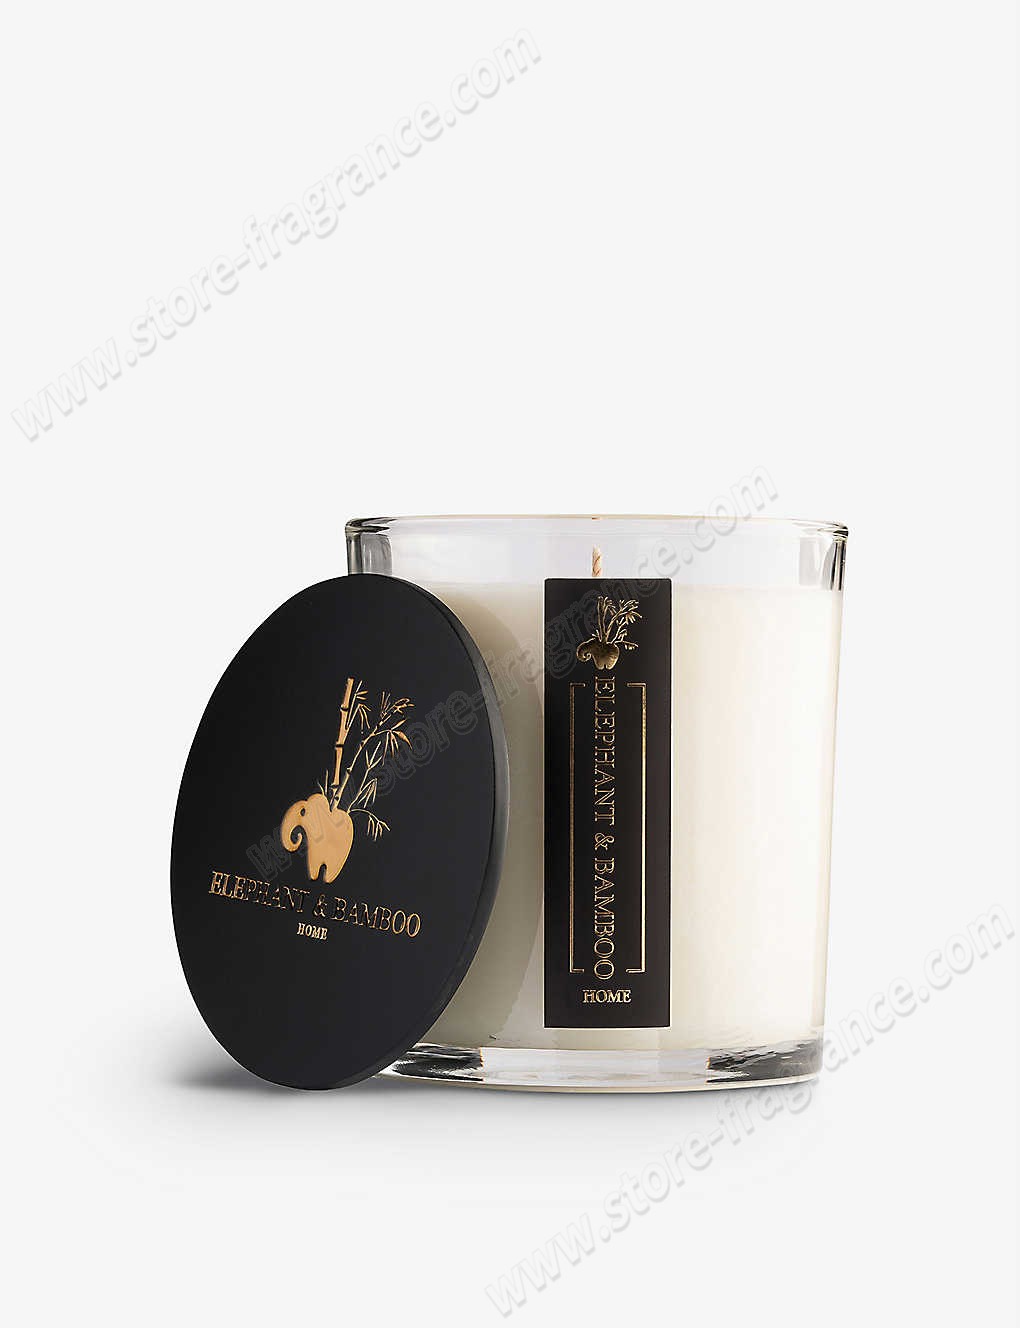 ELEPHANT & BAMBOO/Lychee Peony scented candle 300g ✿ Discount Store - ELEPHANT & BAMBOO/Lychee Peony scented candle 300g ✿ Discount Store